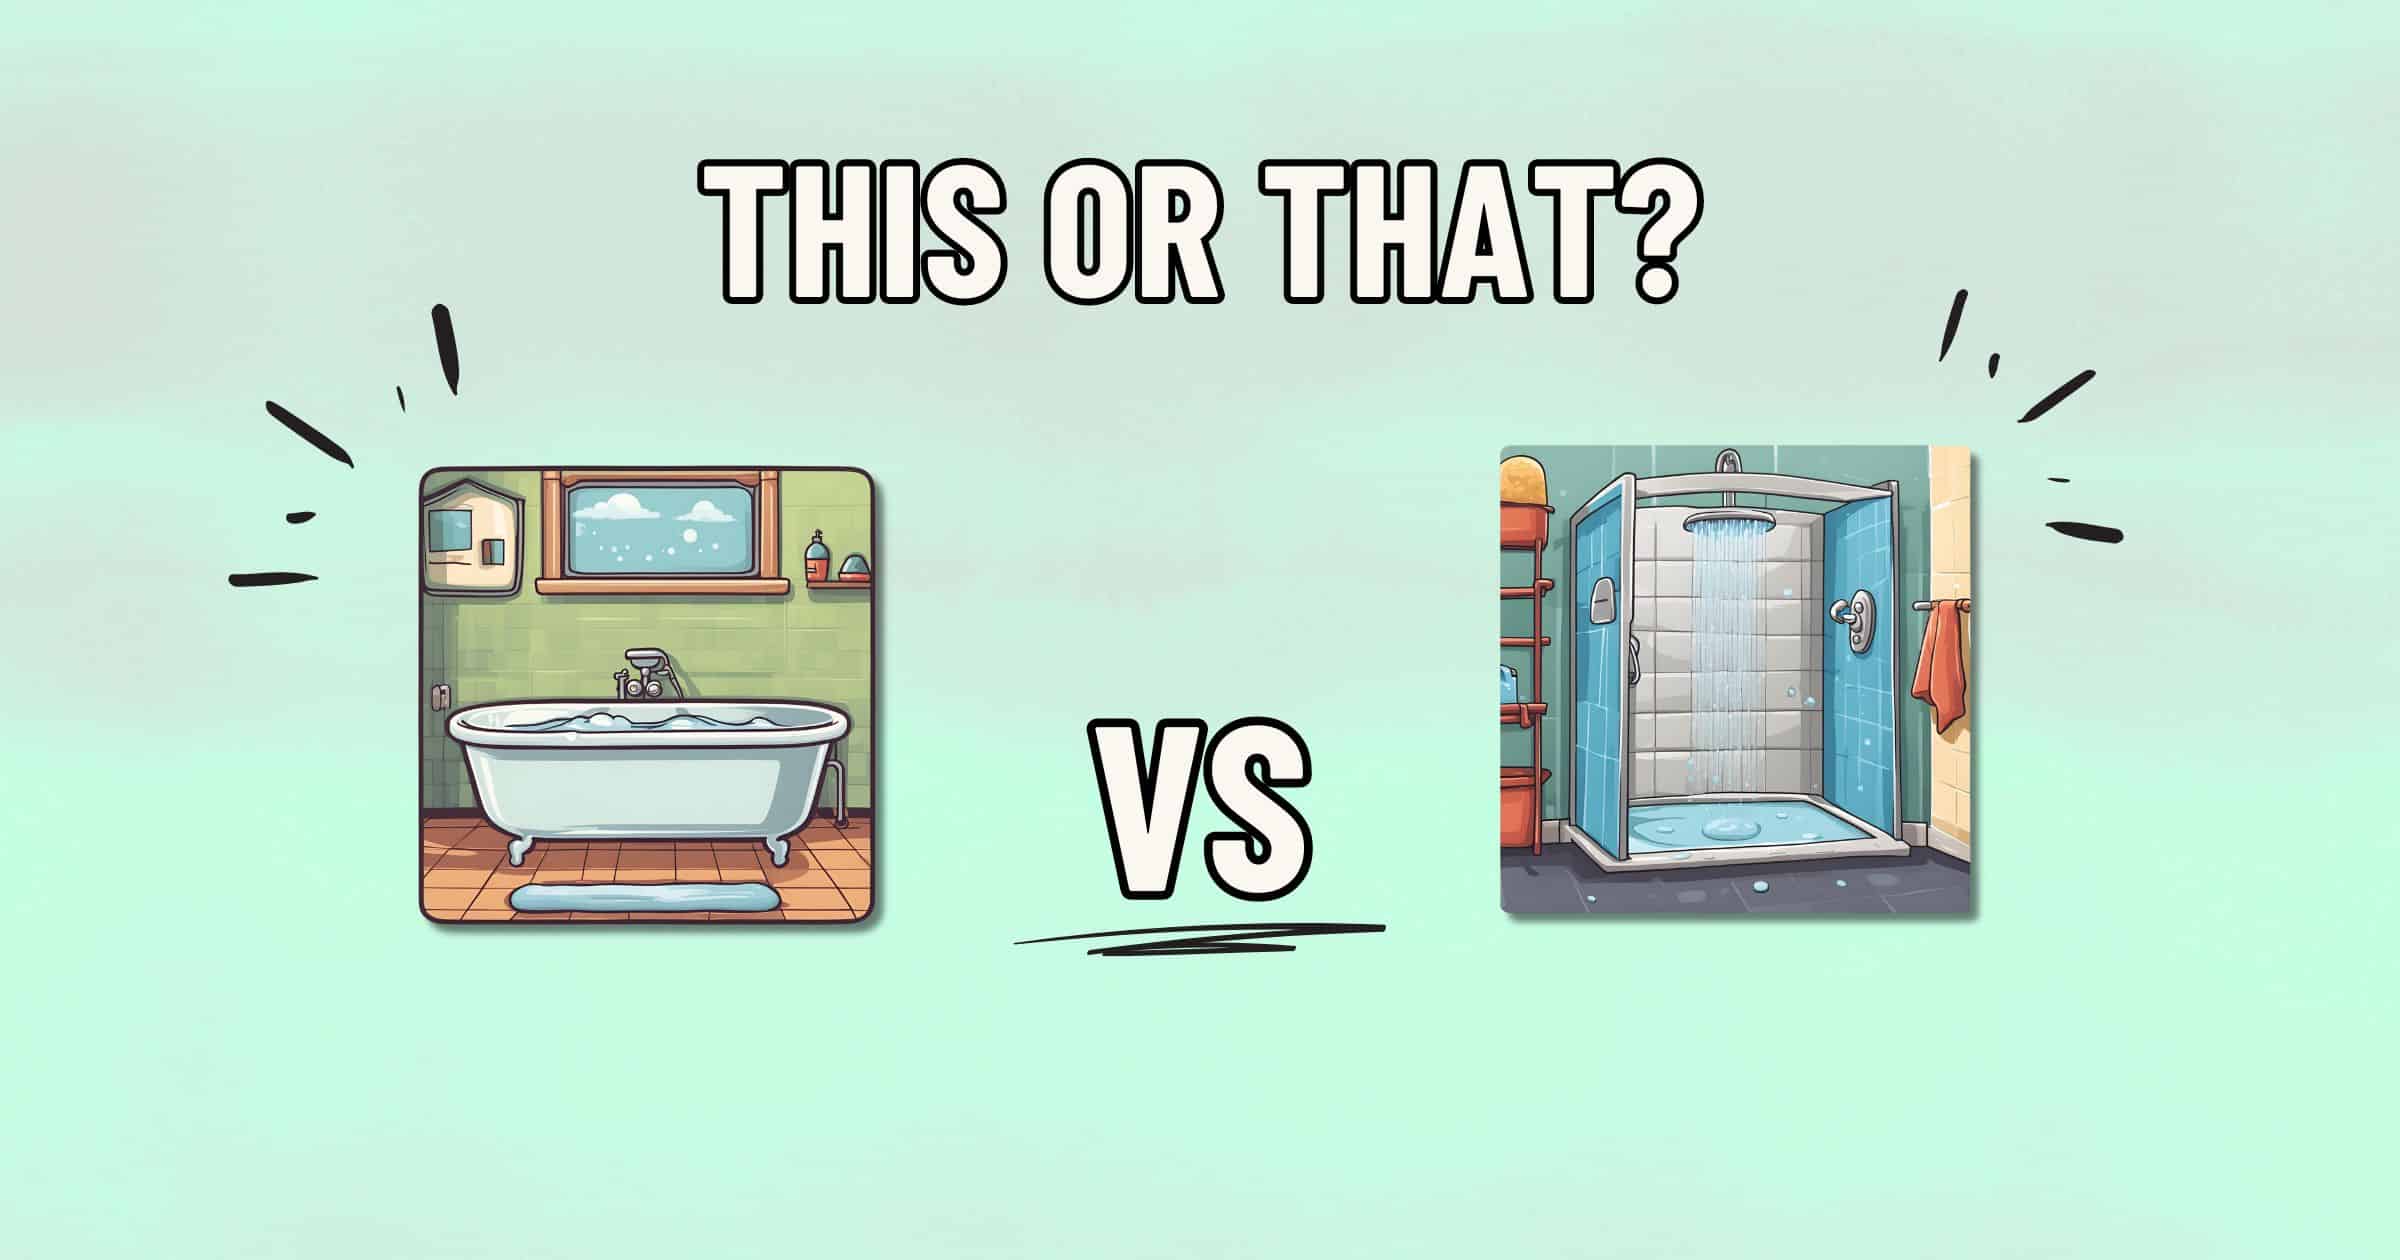 A comparison image with the text "THIS OR THAT?" at the top. On the left is an illustration of a bathtub for a relaxing bath in a tiled bathroom. On the right is an illustration of a shower stall with a glass door for possibly healthier hygiene. The word "VS" is in the middle.